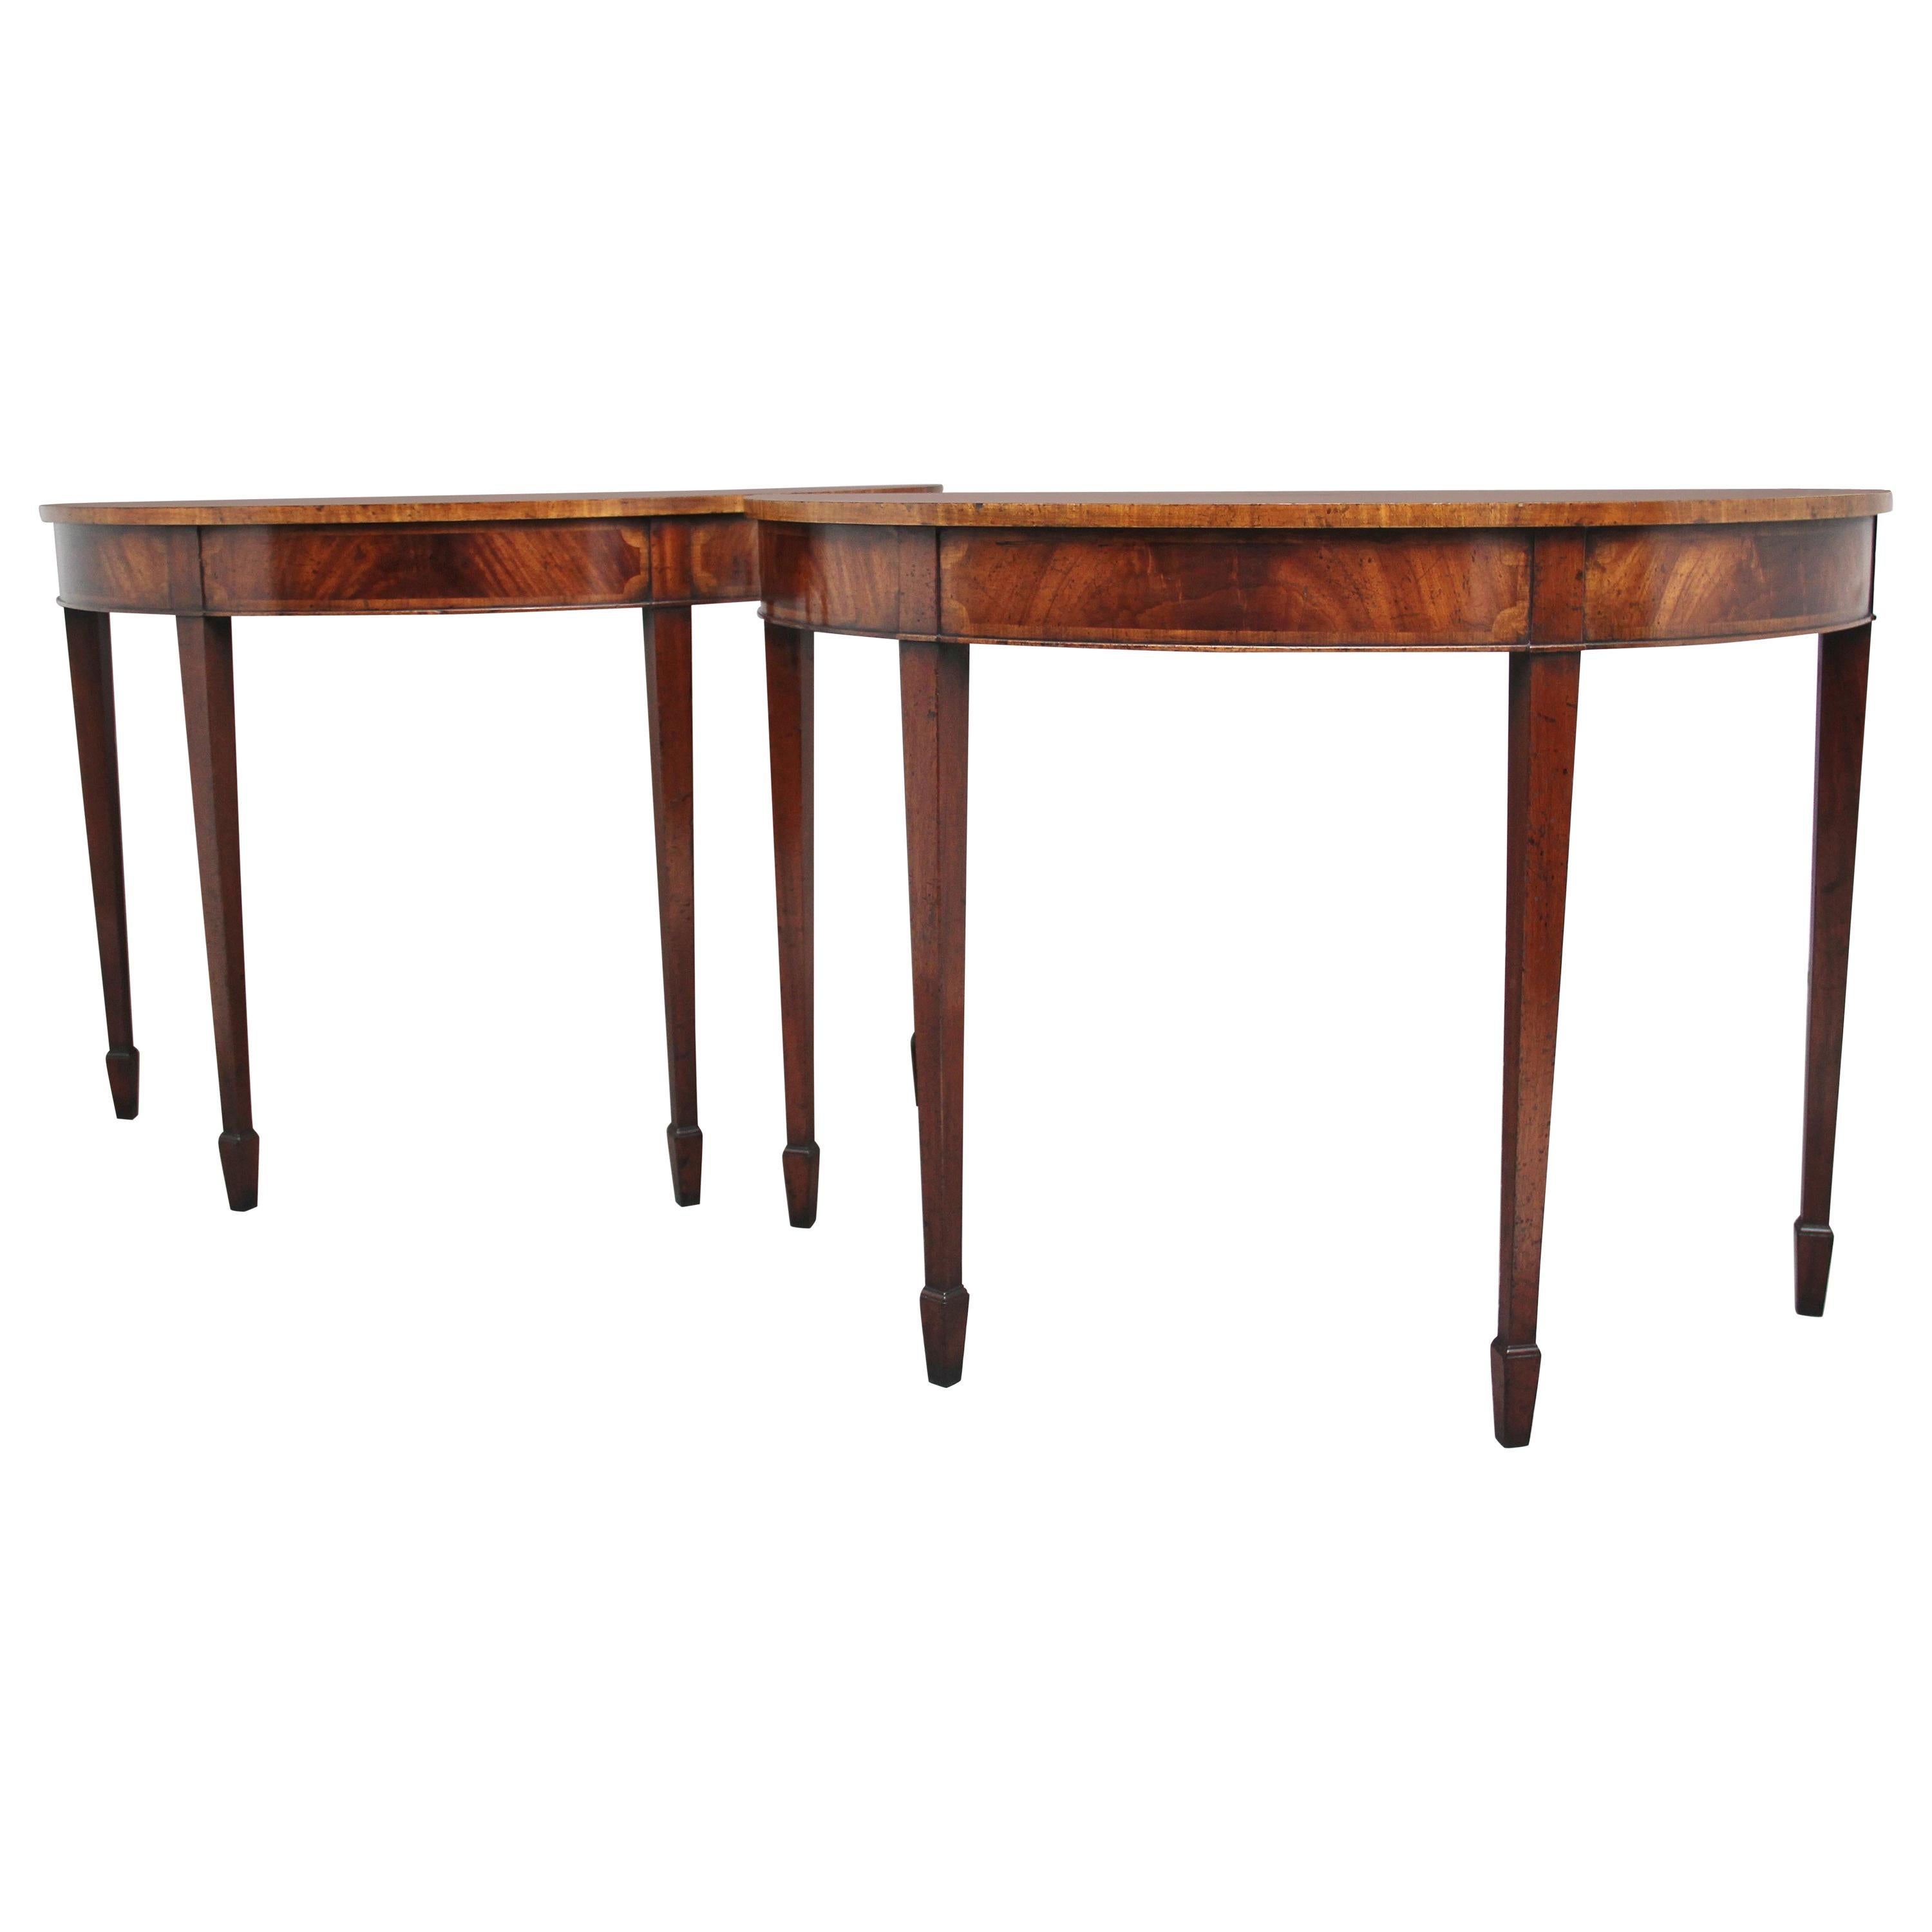 Pair of Inlaid Mahogany Console Tables